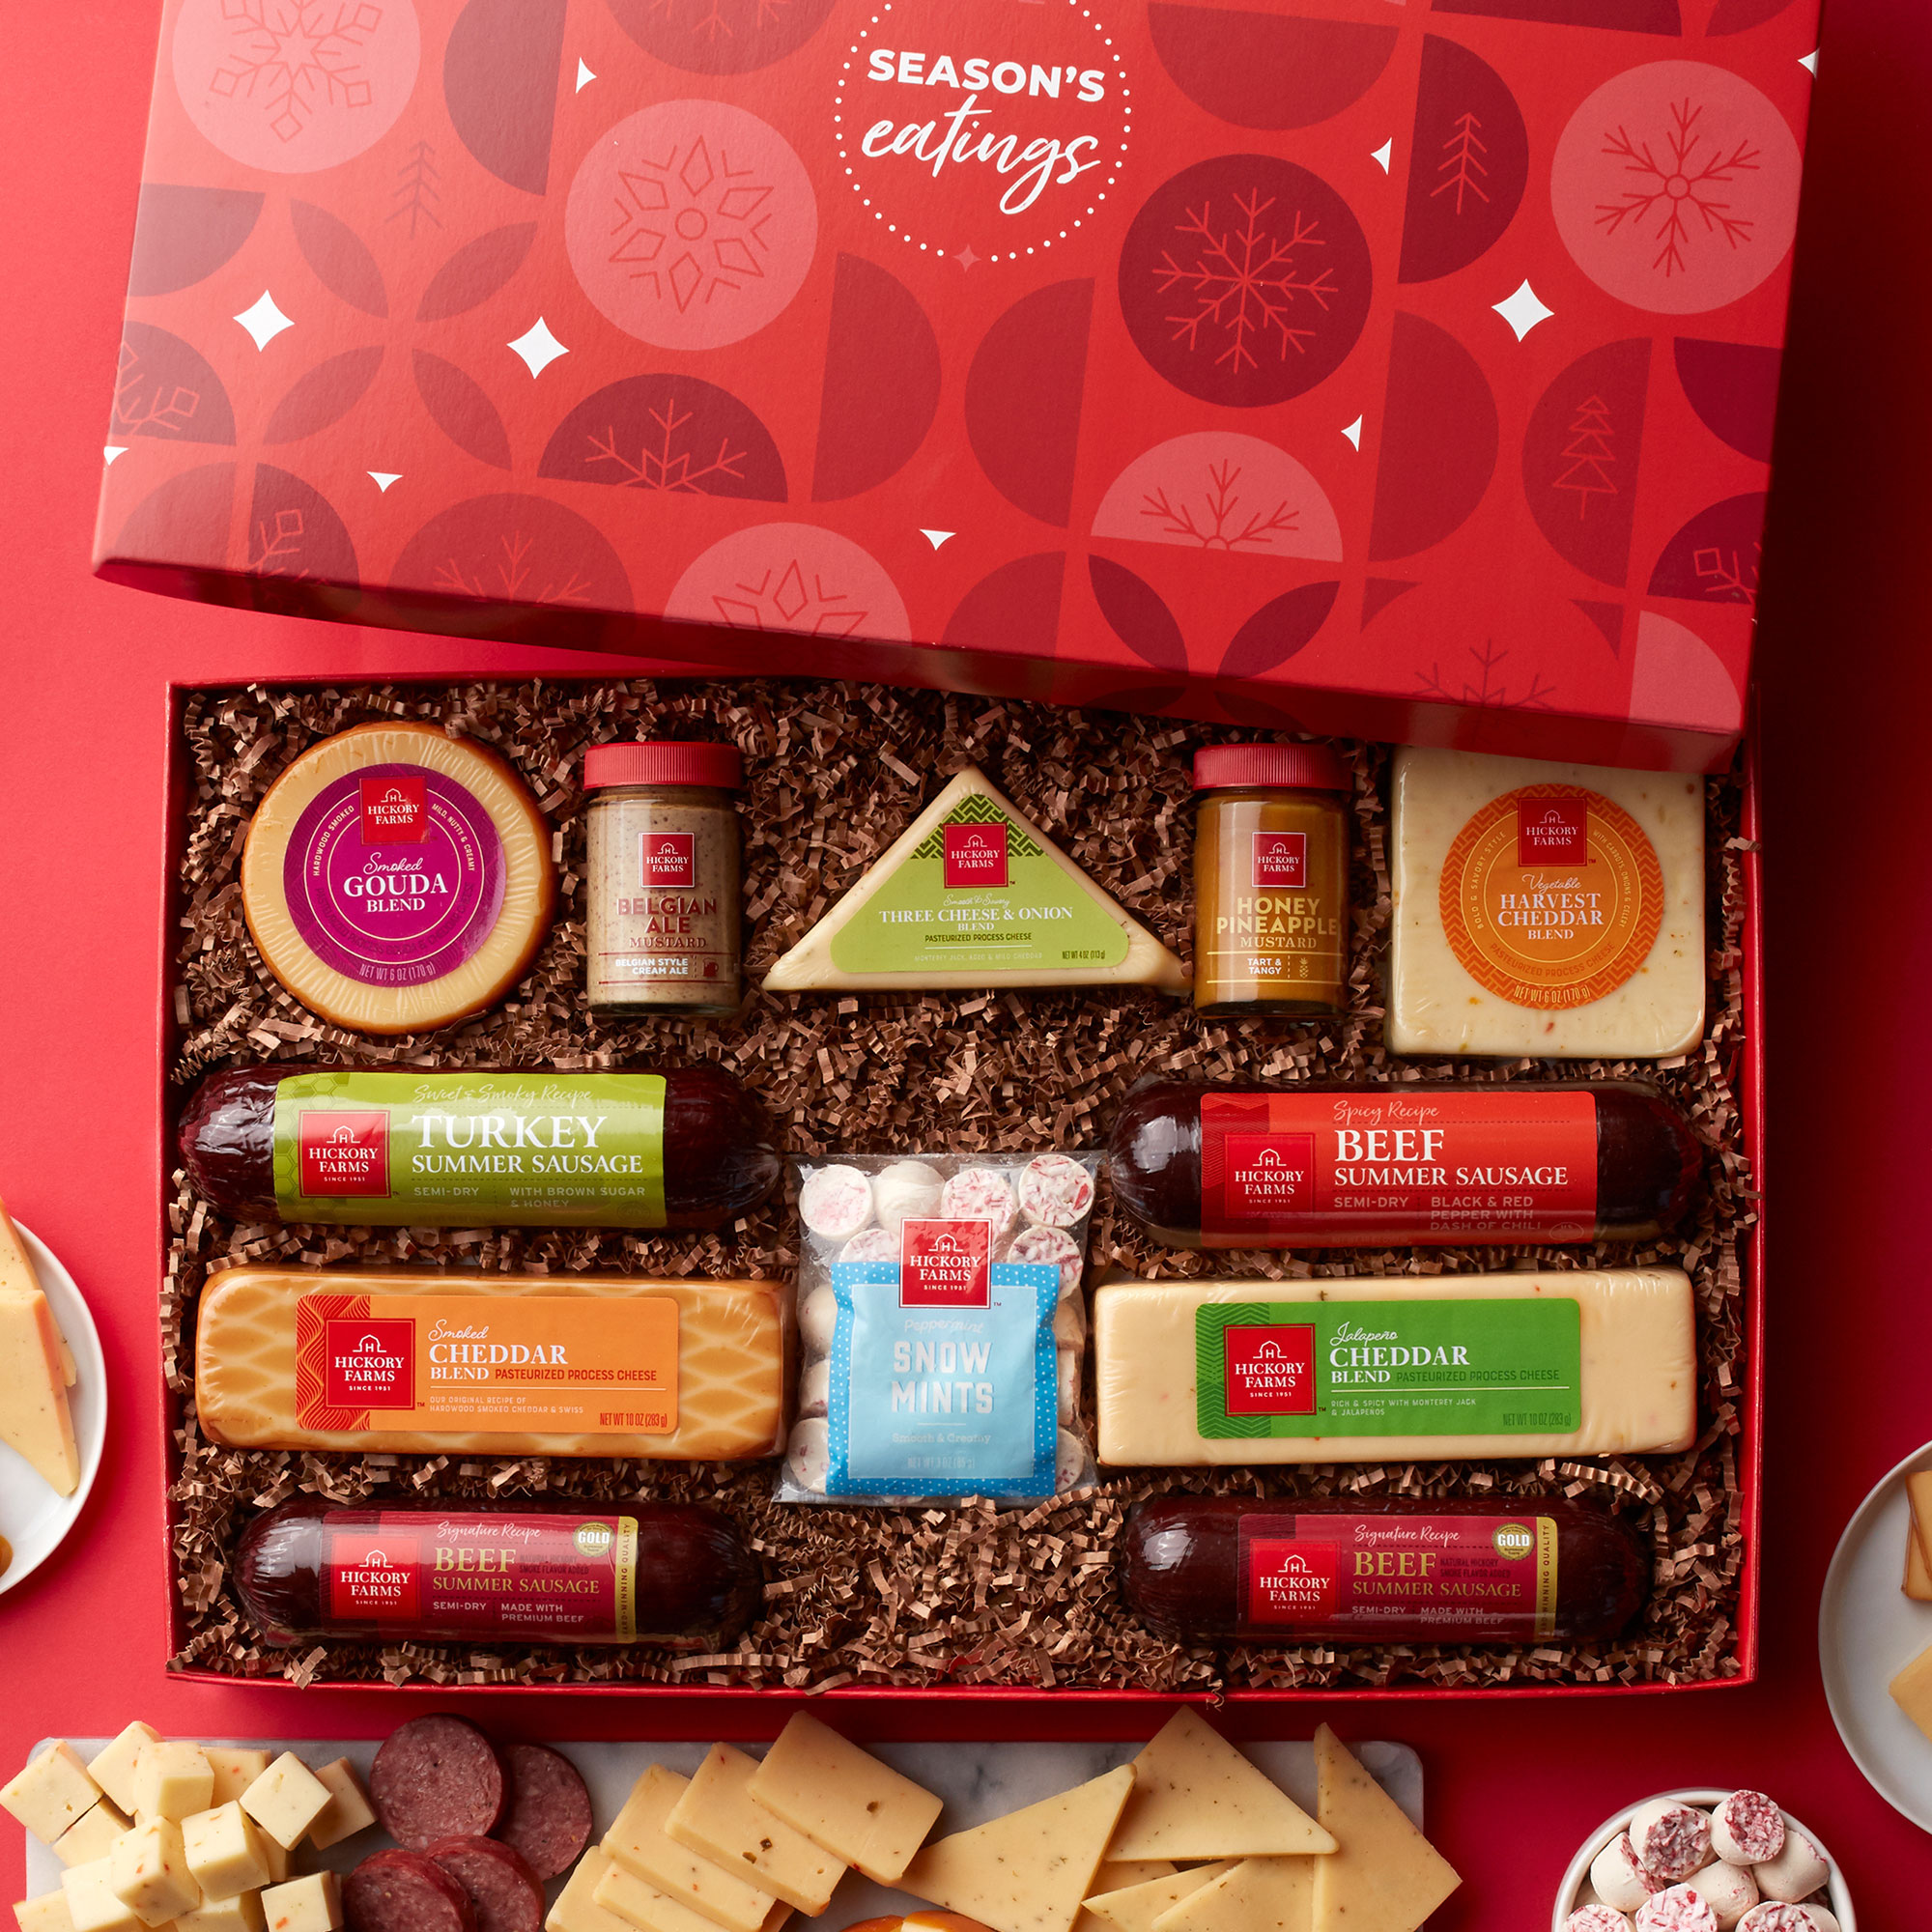 This Christmas variety bucket contains 17 great tasting food